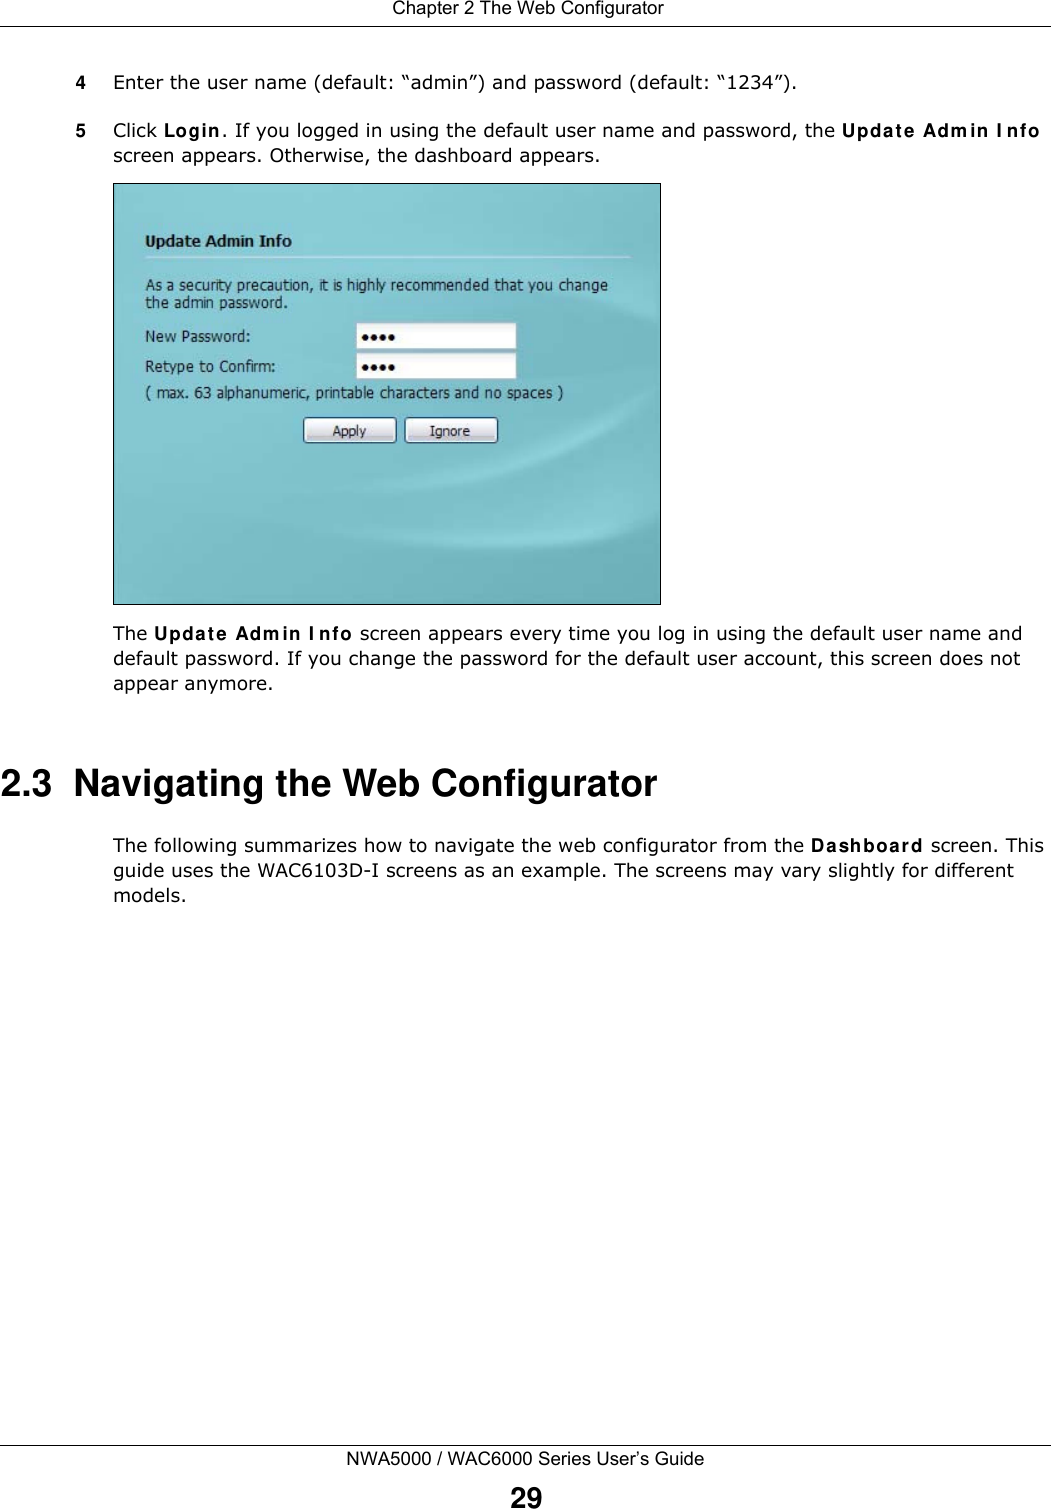  Chapter 2 The Web ConfiguratorNWA5000 / WAC6000 Series User’s Guide294Enter the user name (default: “admin”) and password (default: “1234”).5Click Login. If you logged in using the default user name and password, the Update Admin Info screen appears. Otherwise, the dashboard appears. The Update Admin Info screen appears every time you log in using the default user name and default password. If you change the password for the default user account, this screen does not appear anymore.2.3  Navigating the Web ConfiguratorThe following summarizes how to navigate the web configurator from the Dashboard screen. This guide uses the WAC6103D-I screens as an example. The screens may vary slightly for different models.